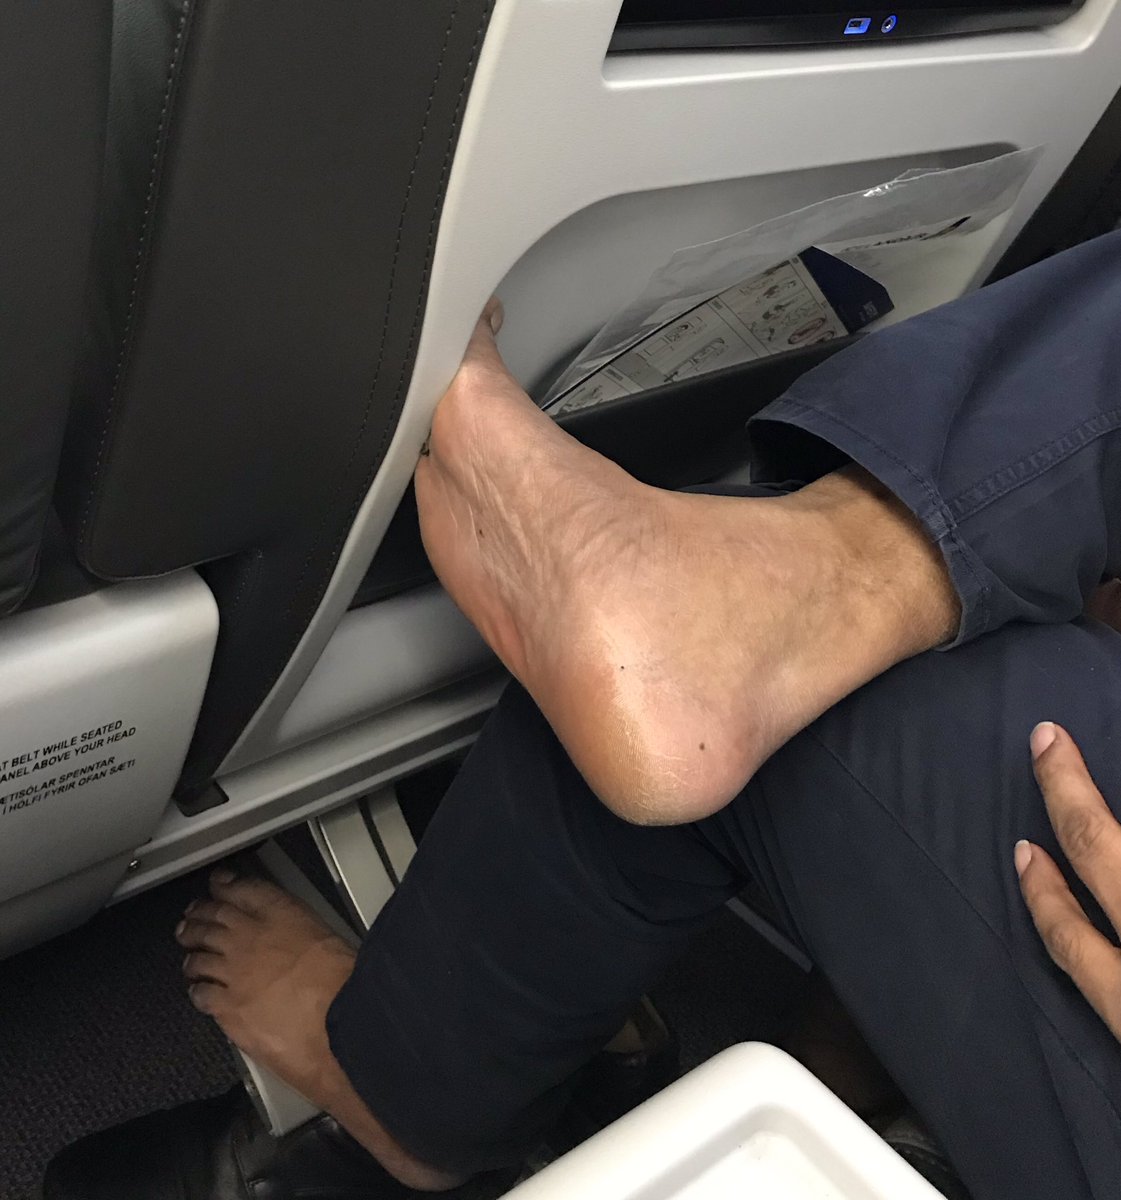 Barefoot guy is now hacking up a lung and not covering his mouth.  And, he crossed his legs so his disgusting foot is even closer to me. Can I make a citizen’s arrest? #passengershaming